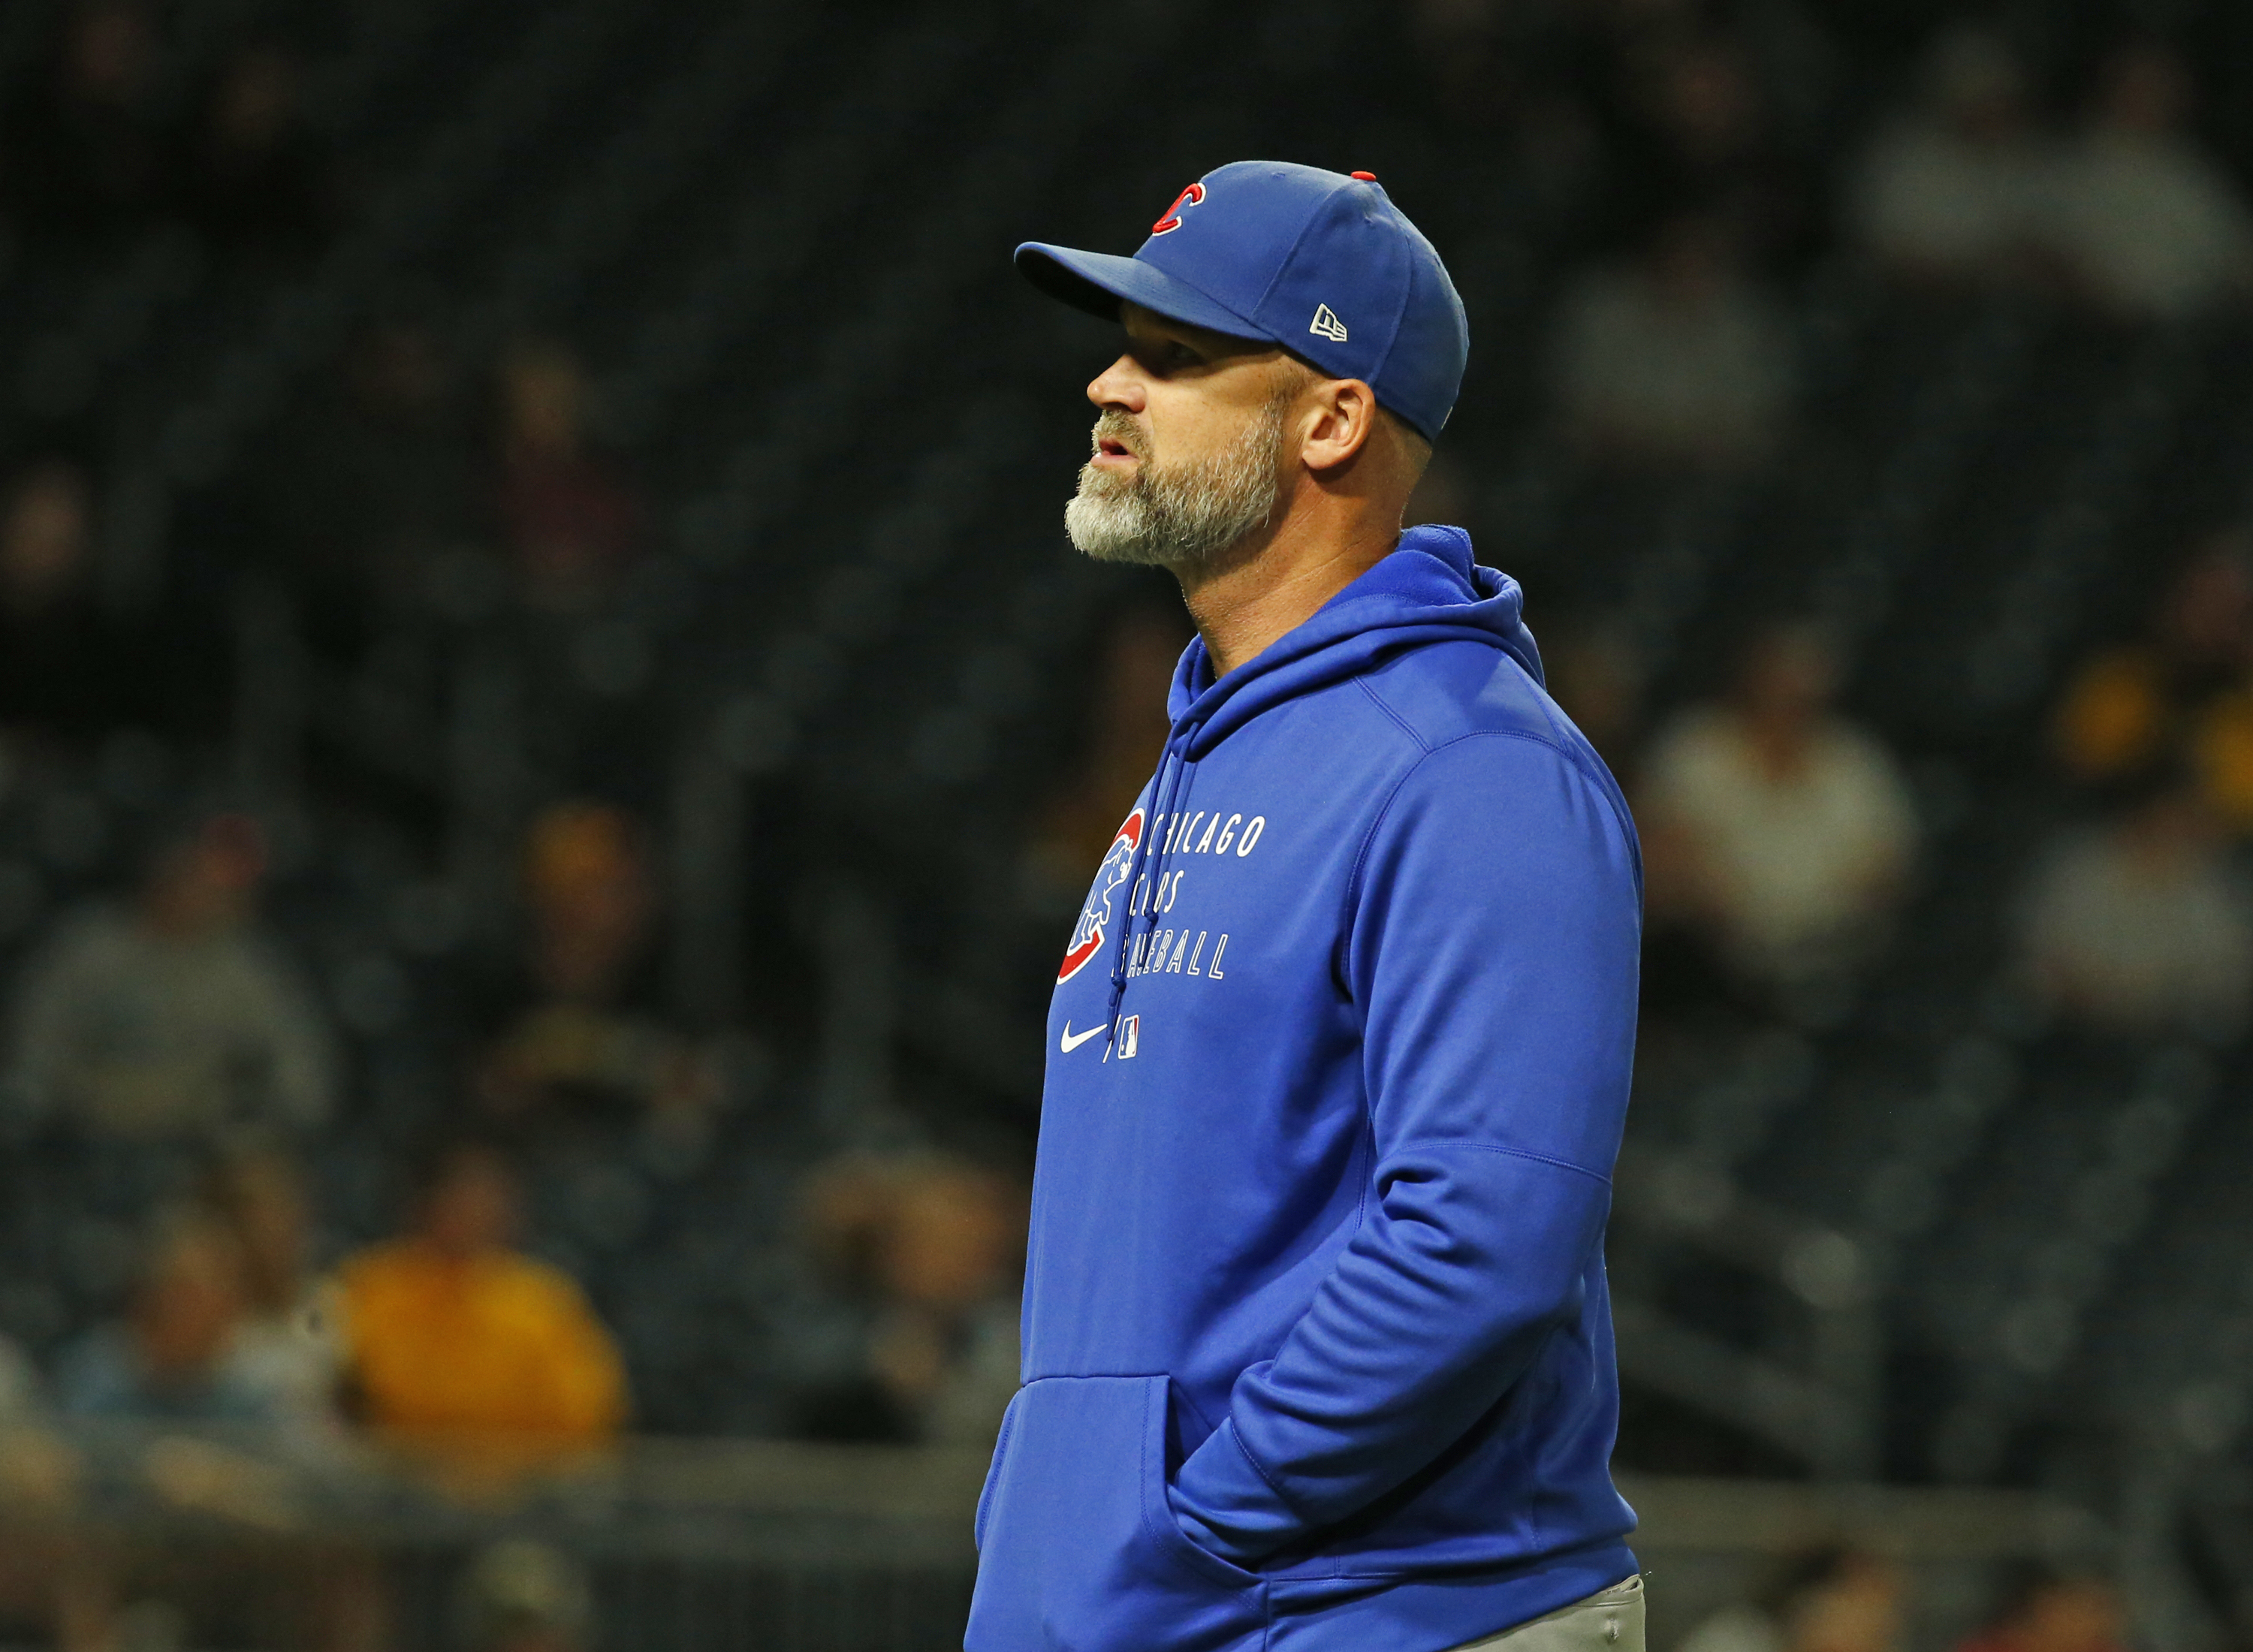 Cubs extend manager David Ross' contract